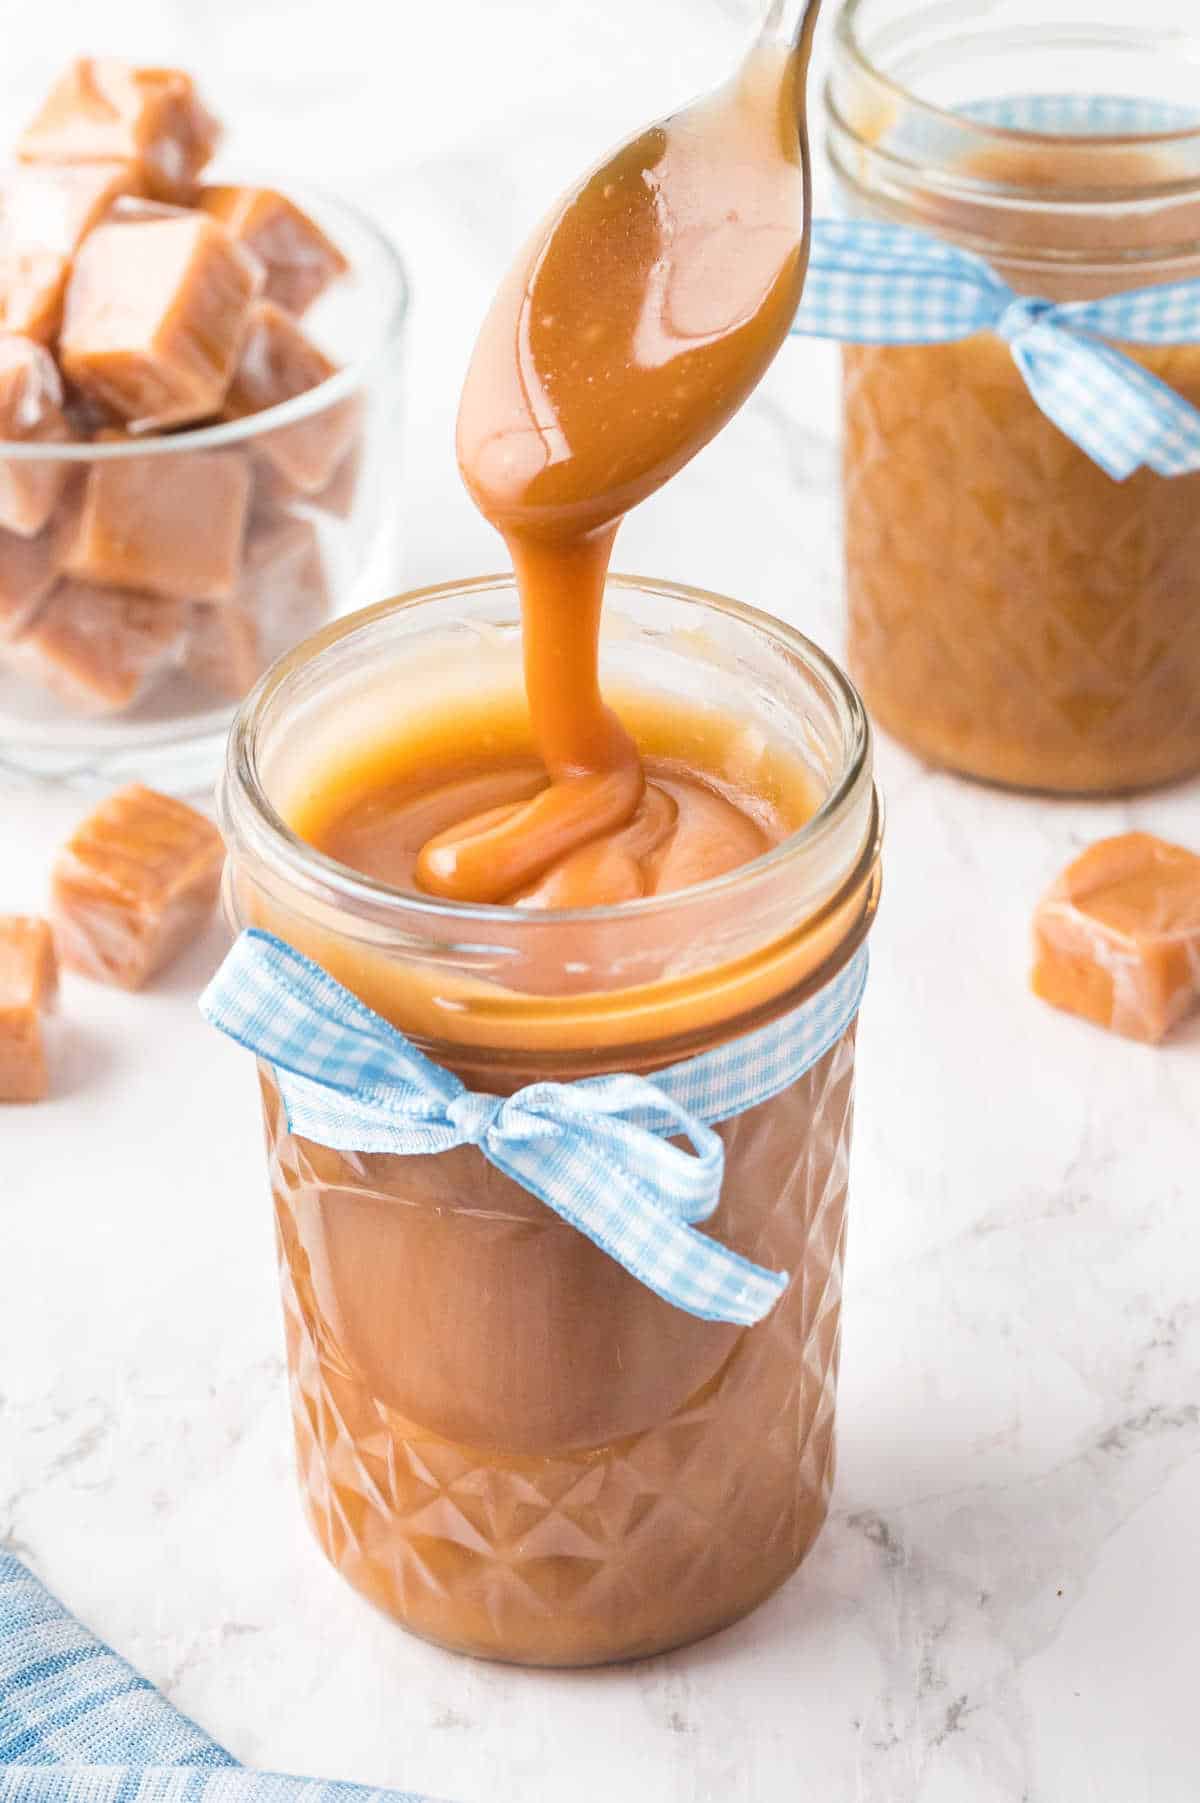 Caramel sauce in a glass jar and coming off a spoon over the jar.